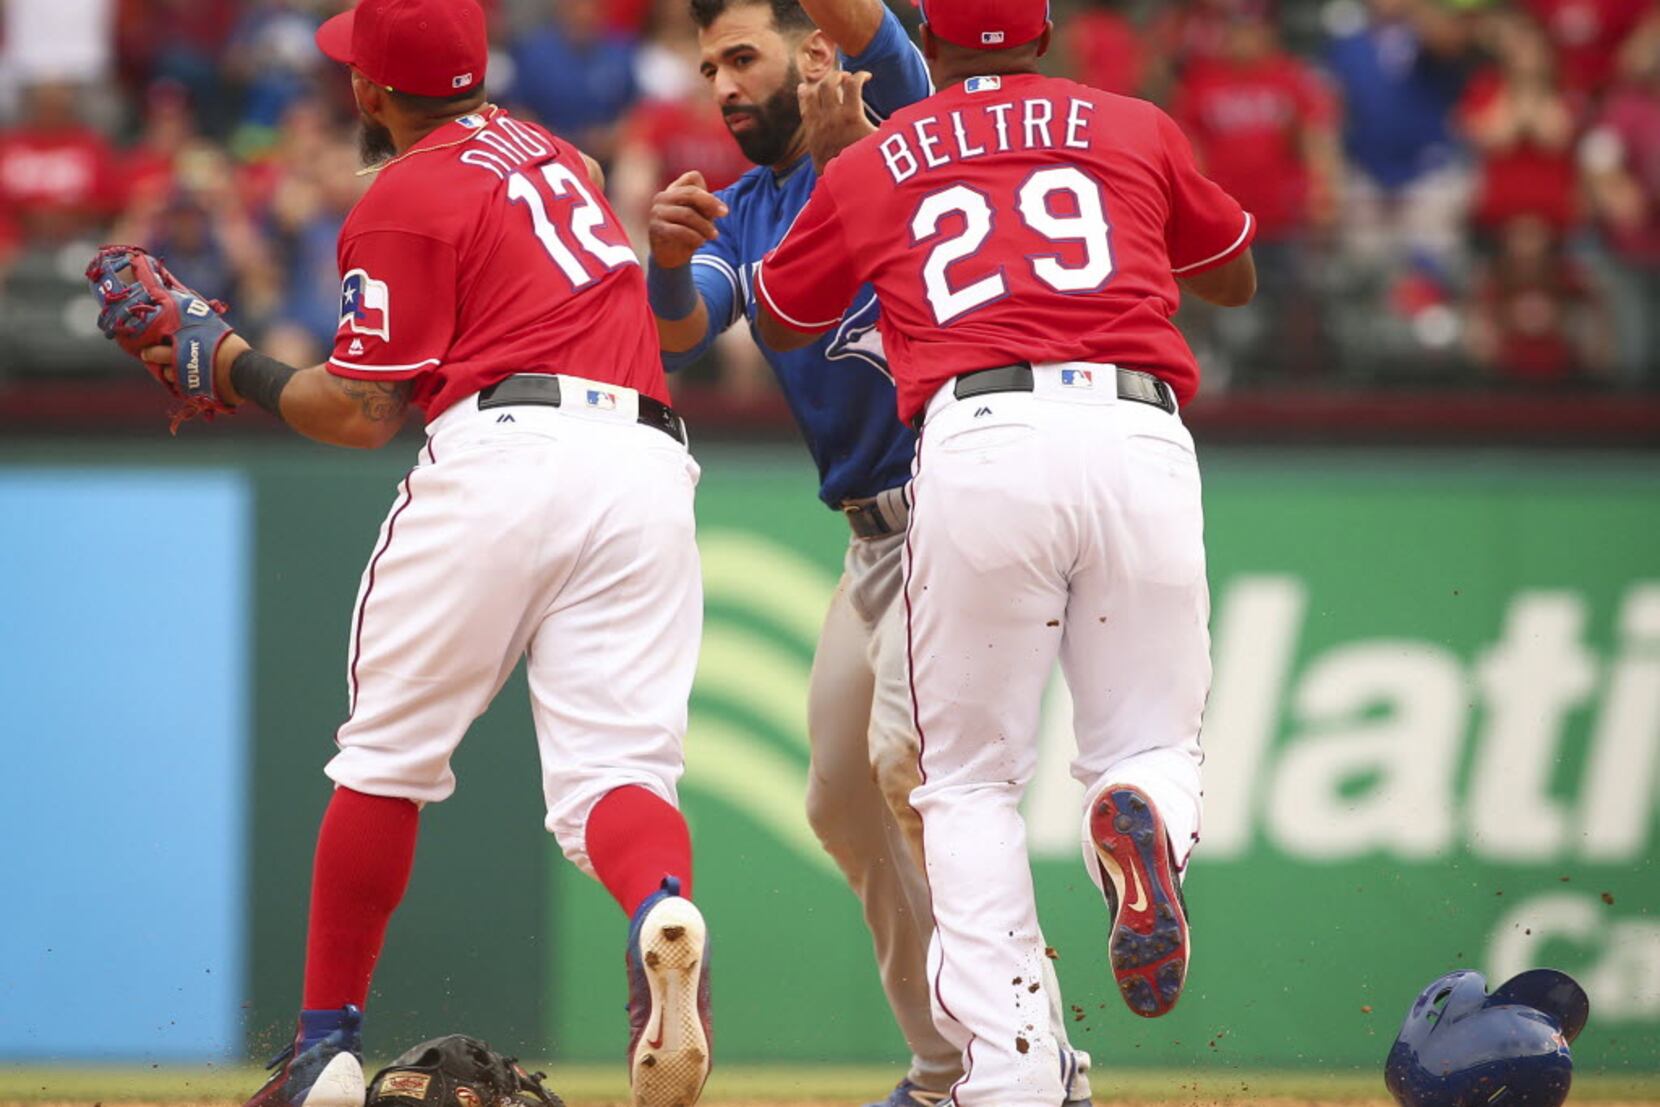 Wikipedia pages for Rougned Odor, Jose Bautista hilariously edited after  roles in Rangers-Blue Jays melee